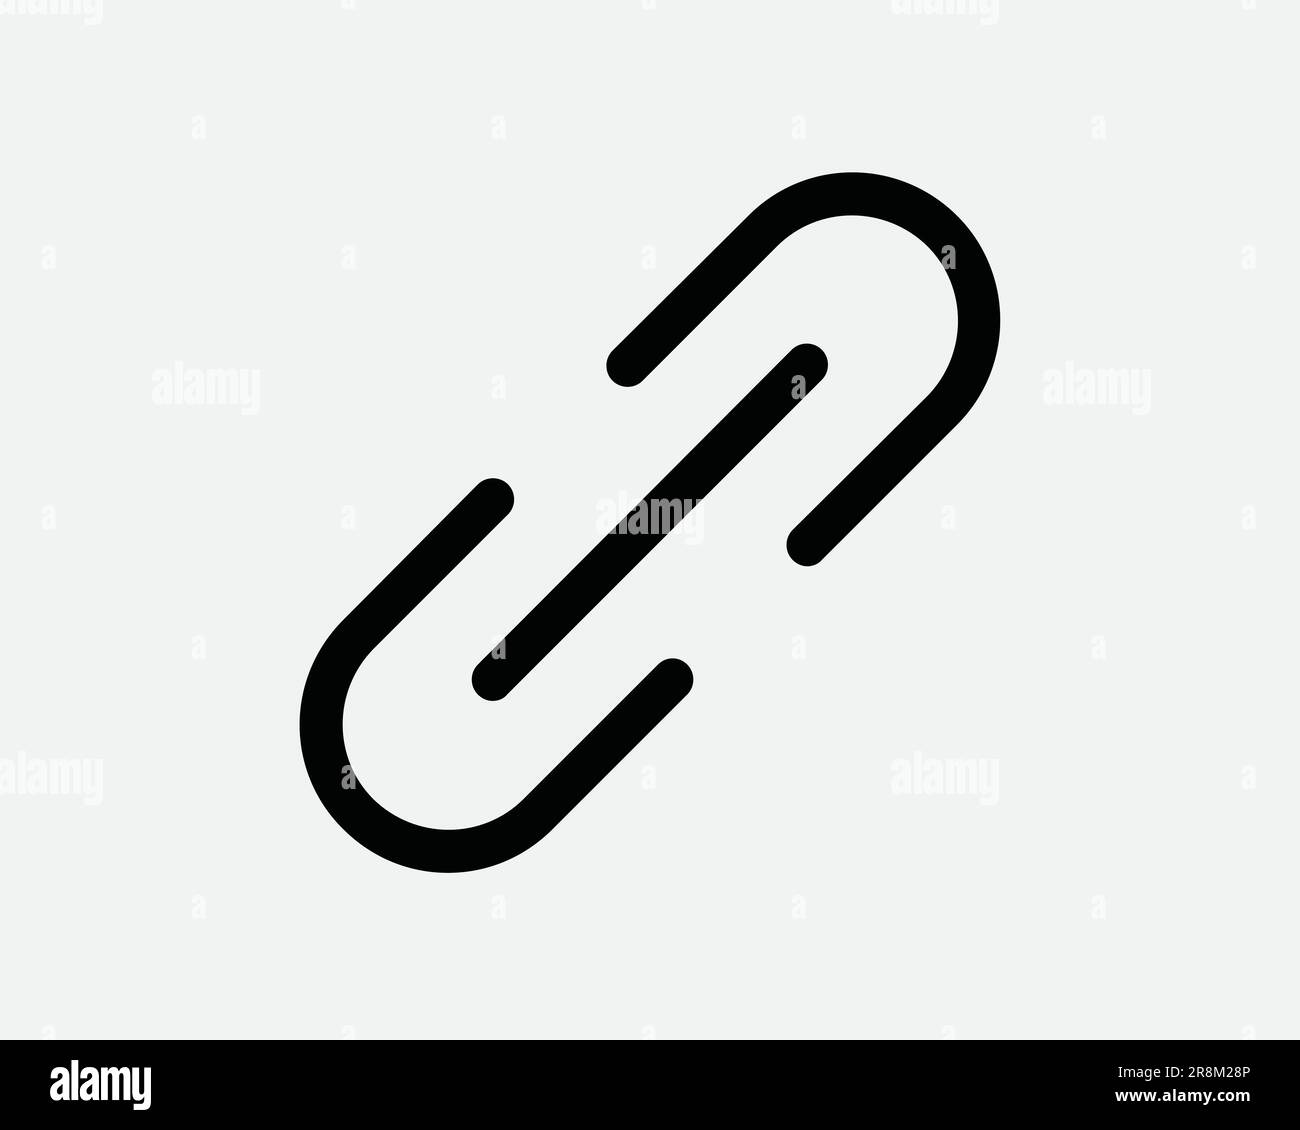 Attachment Link Icon. Chain Connection Attach Email File Network Connect Black White Line Sign Symbol Illustration Artwork Graphic Clipart EPS Vector Stock Vector